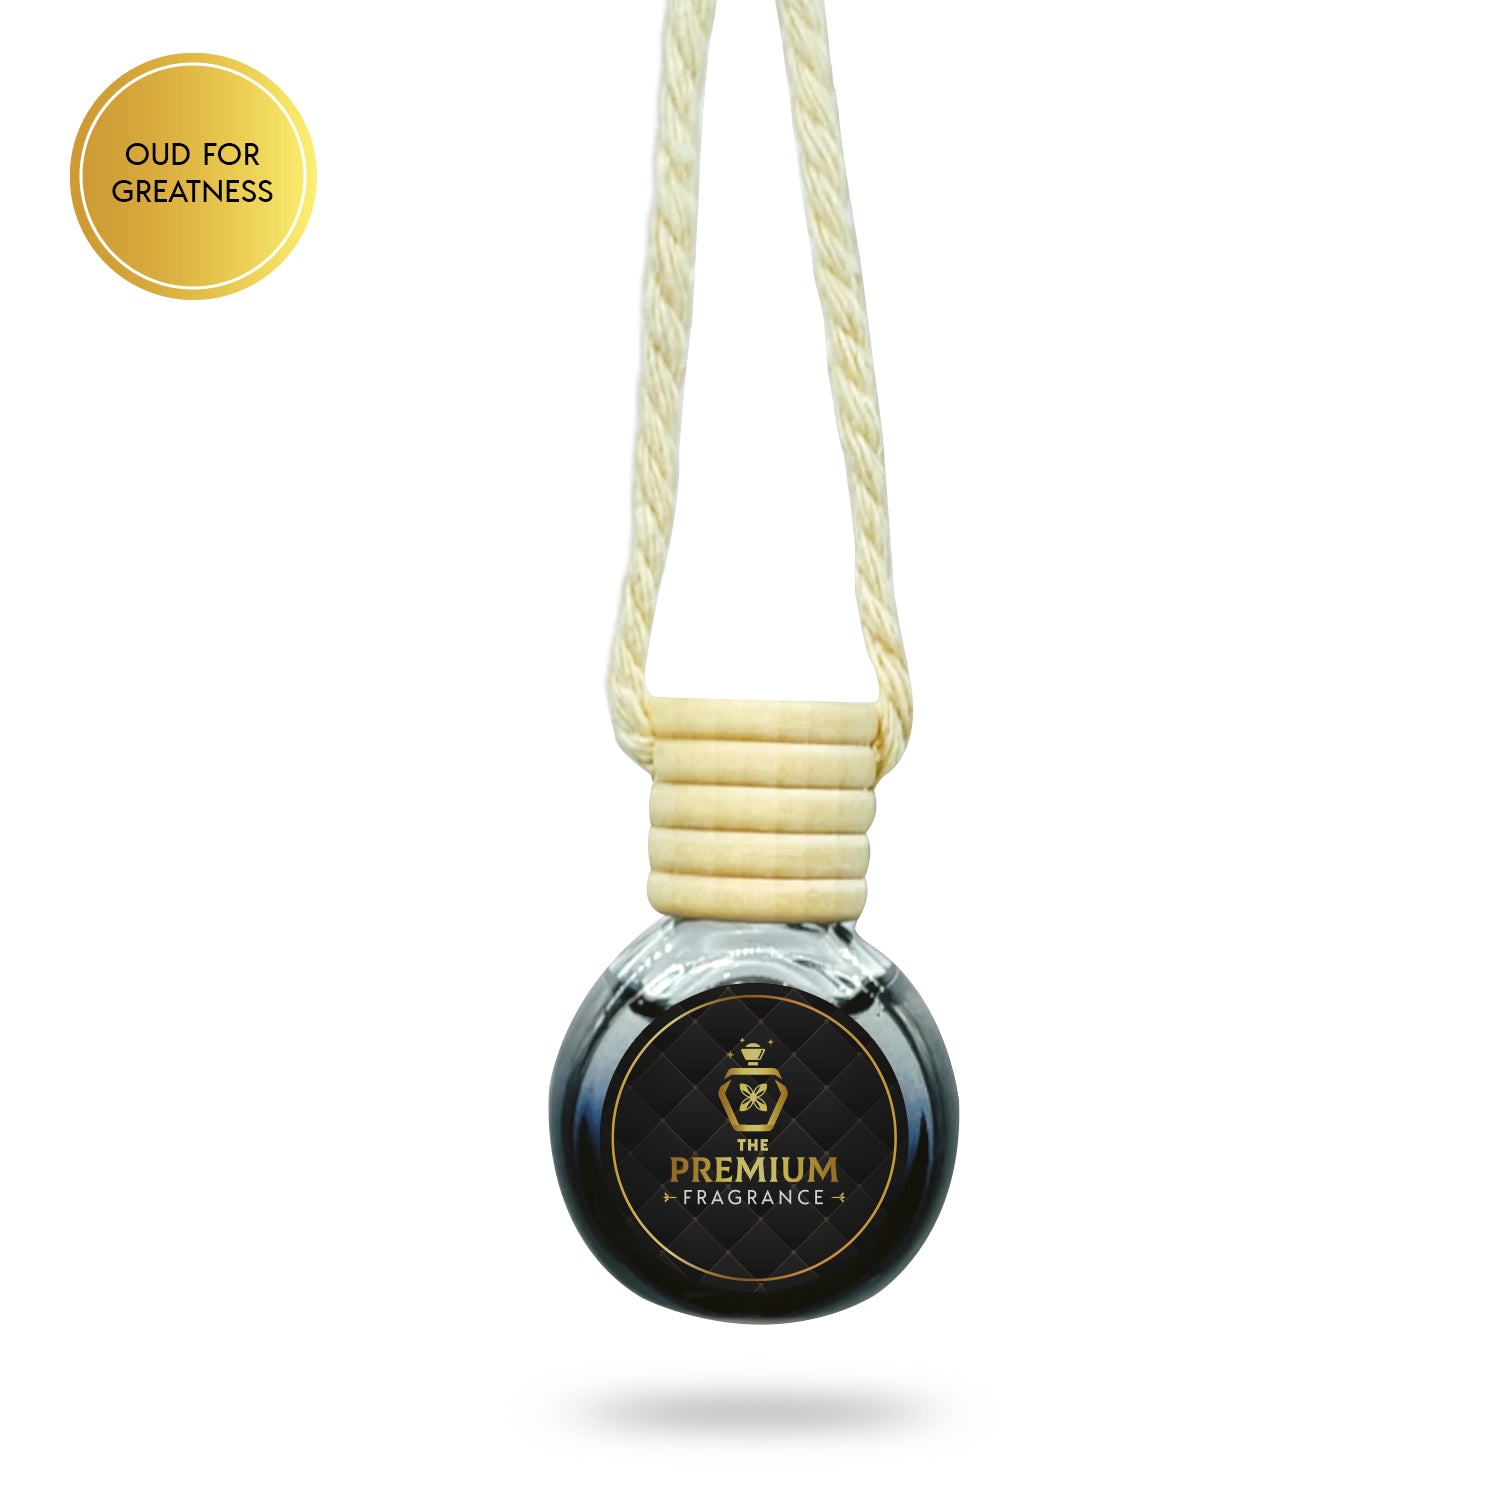 Oud For Greatness - amazing car diffuser aroma freshener odor remover